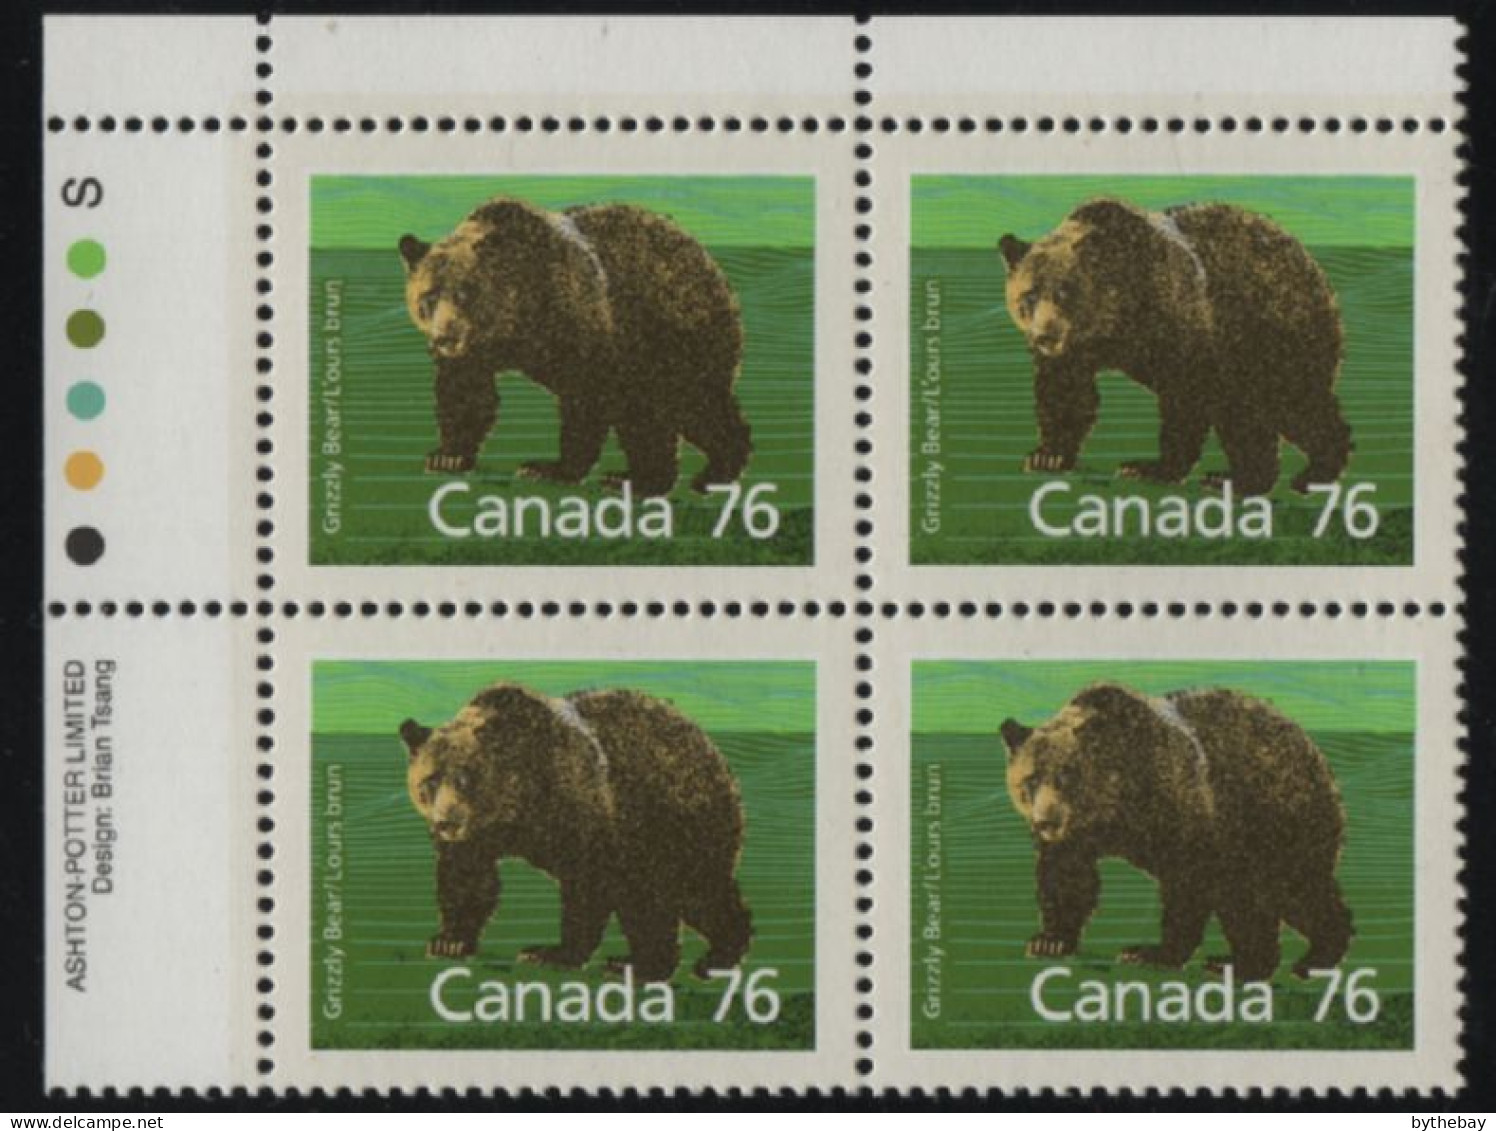 Canada 1988-92 MNH Sc 1178i 76c Grizzly Bear UL Plate Block - Plate Number & Inscriptions